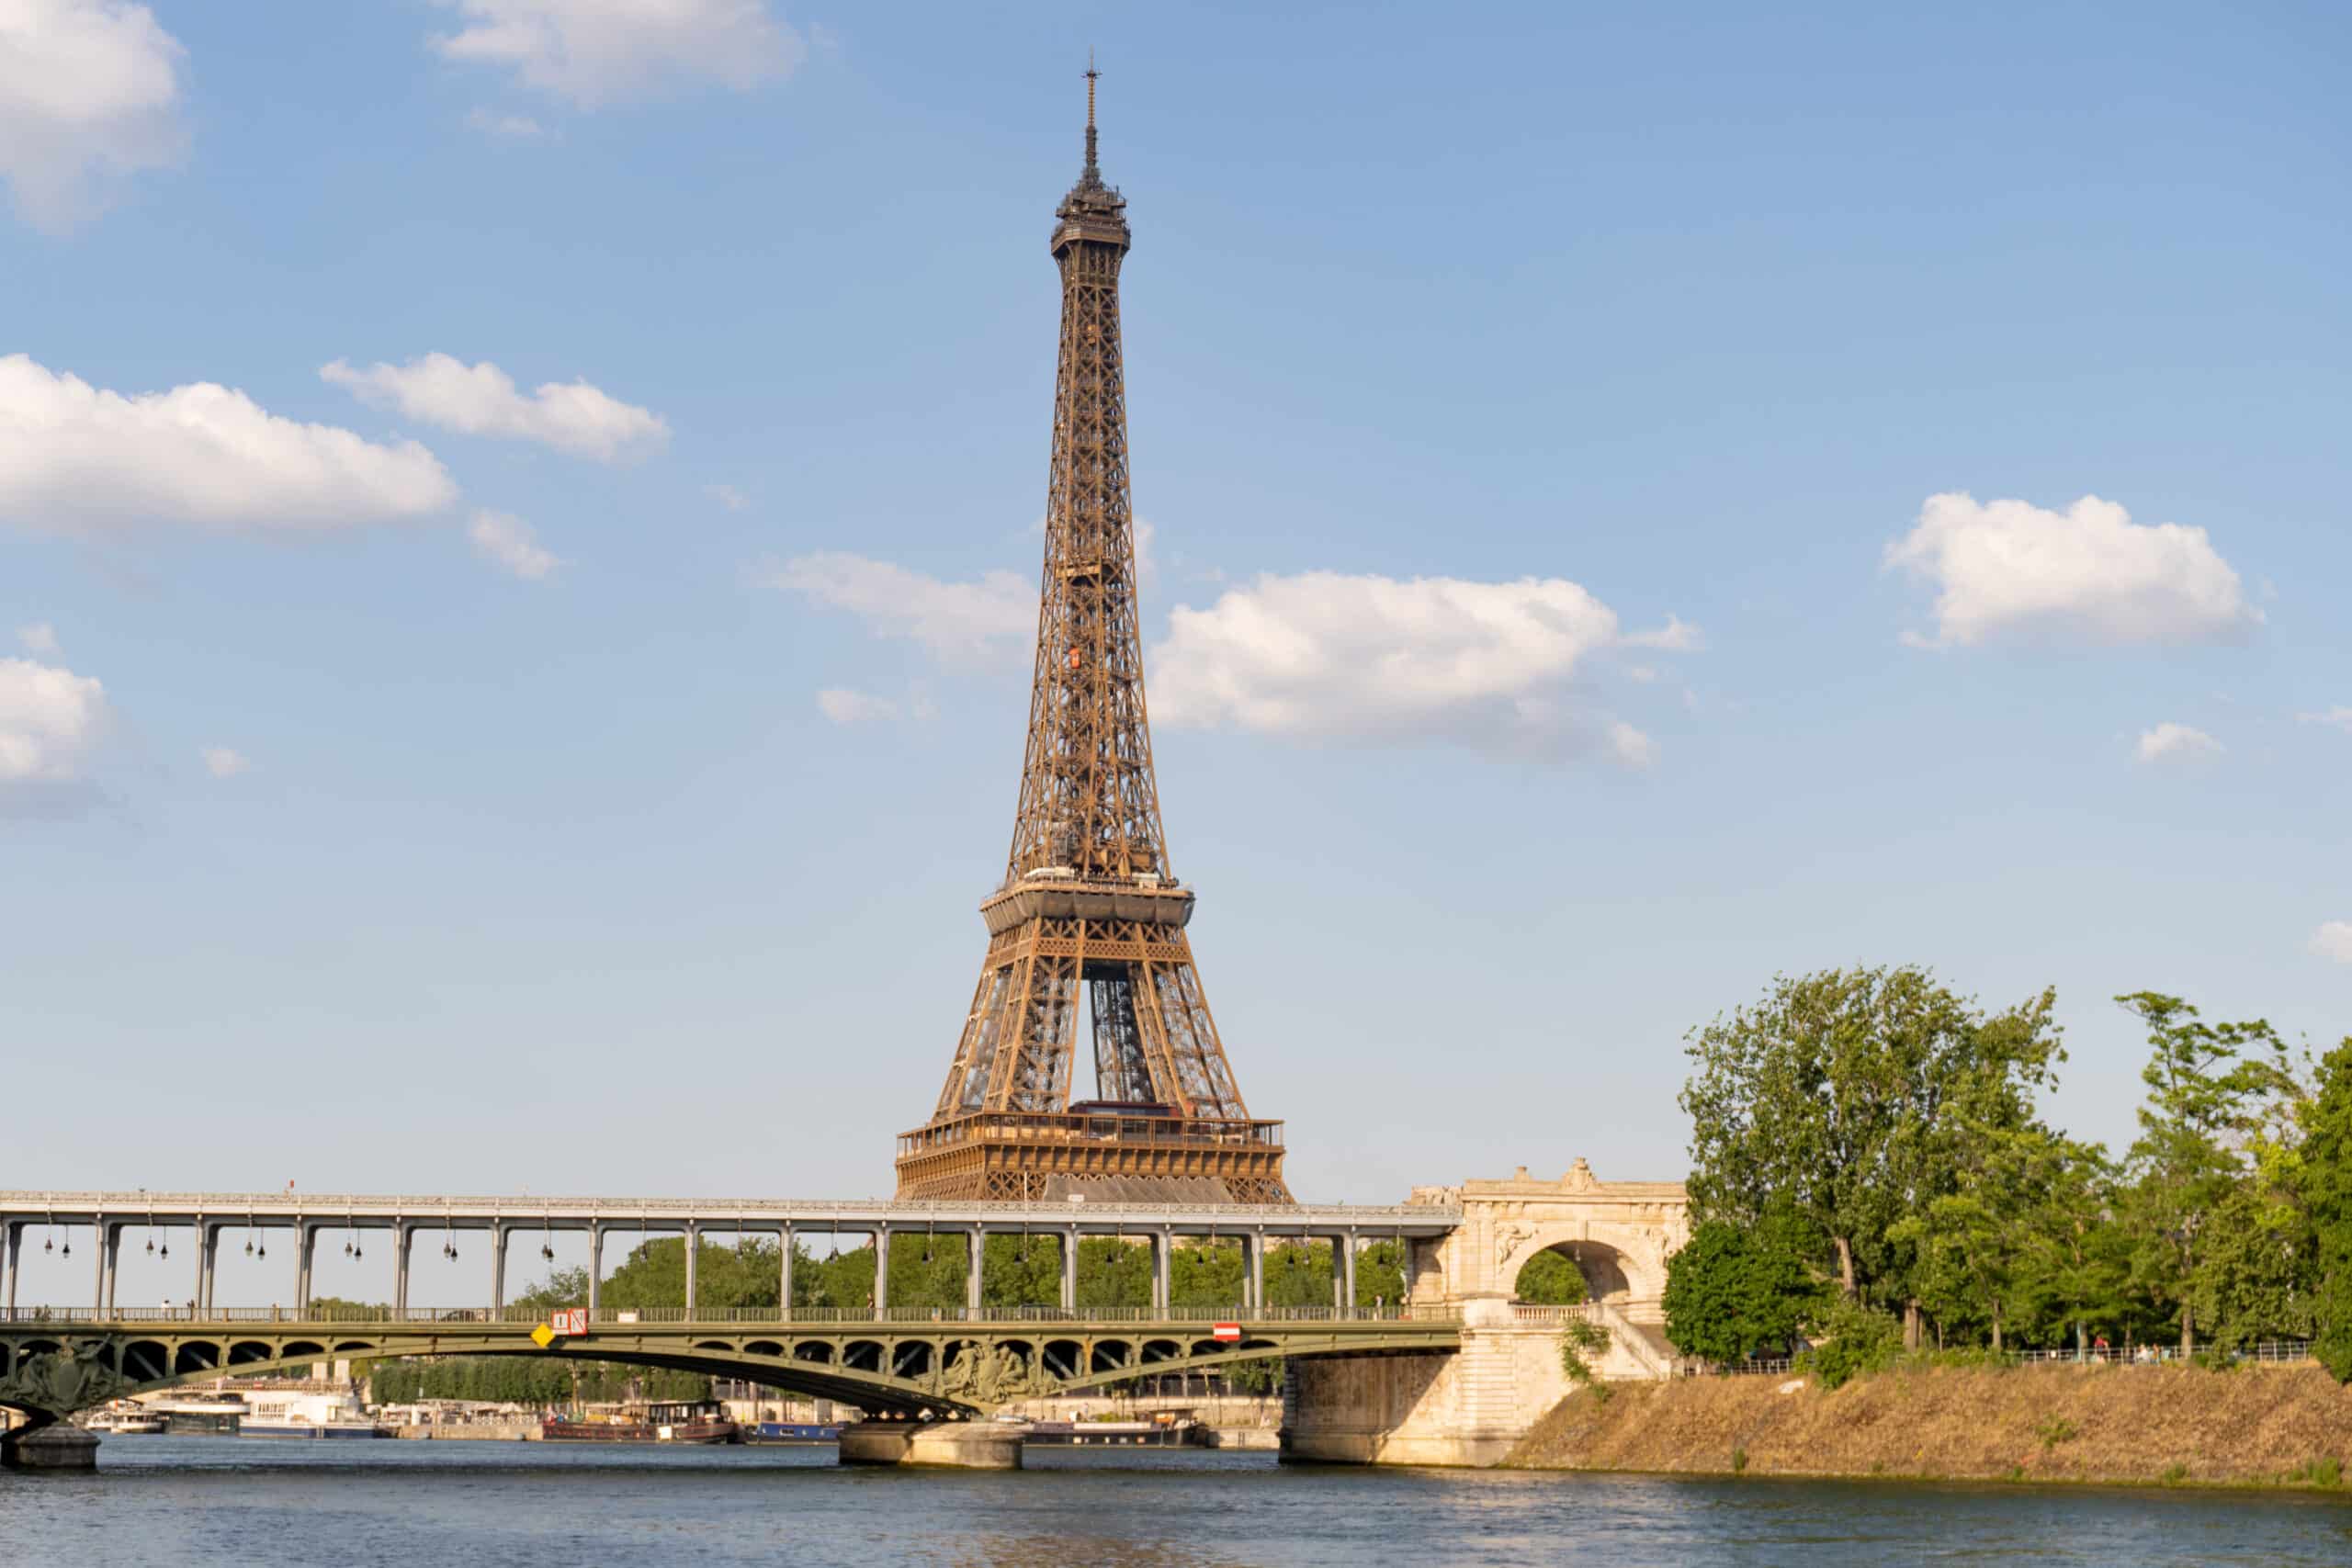 Eiffel Tower seen from the banks of River Seine